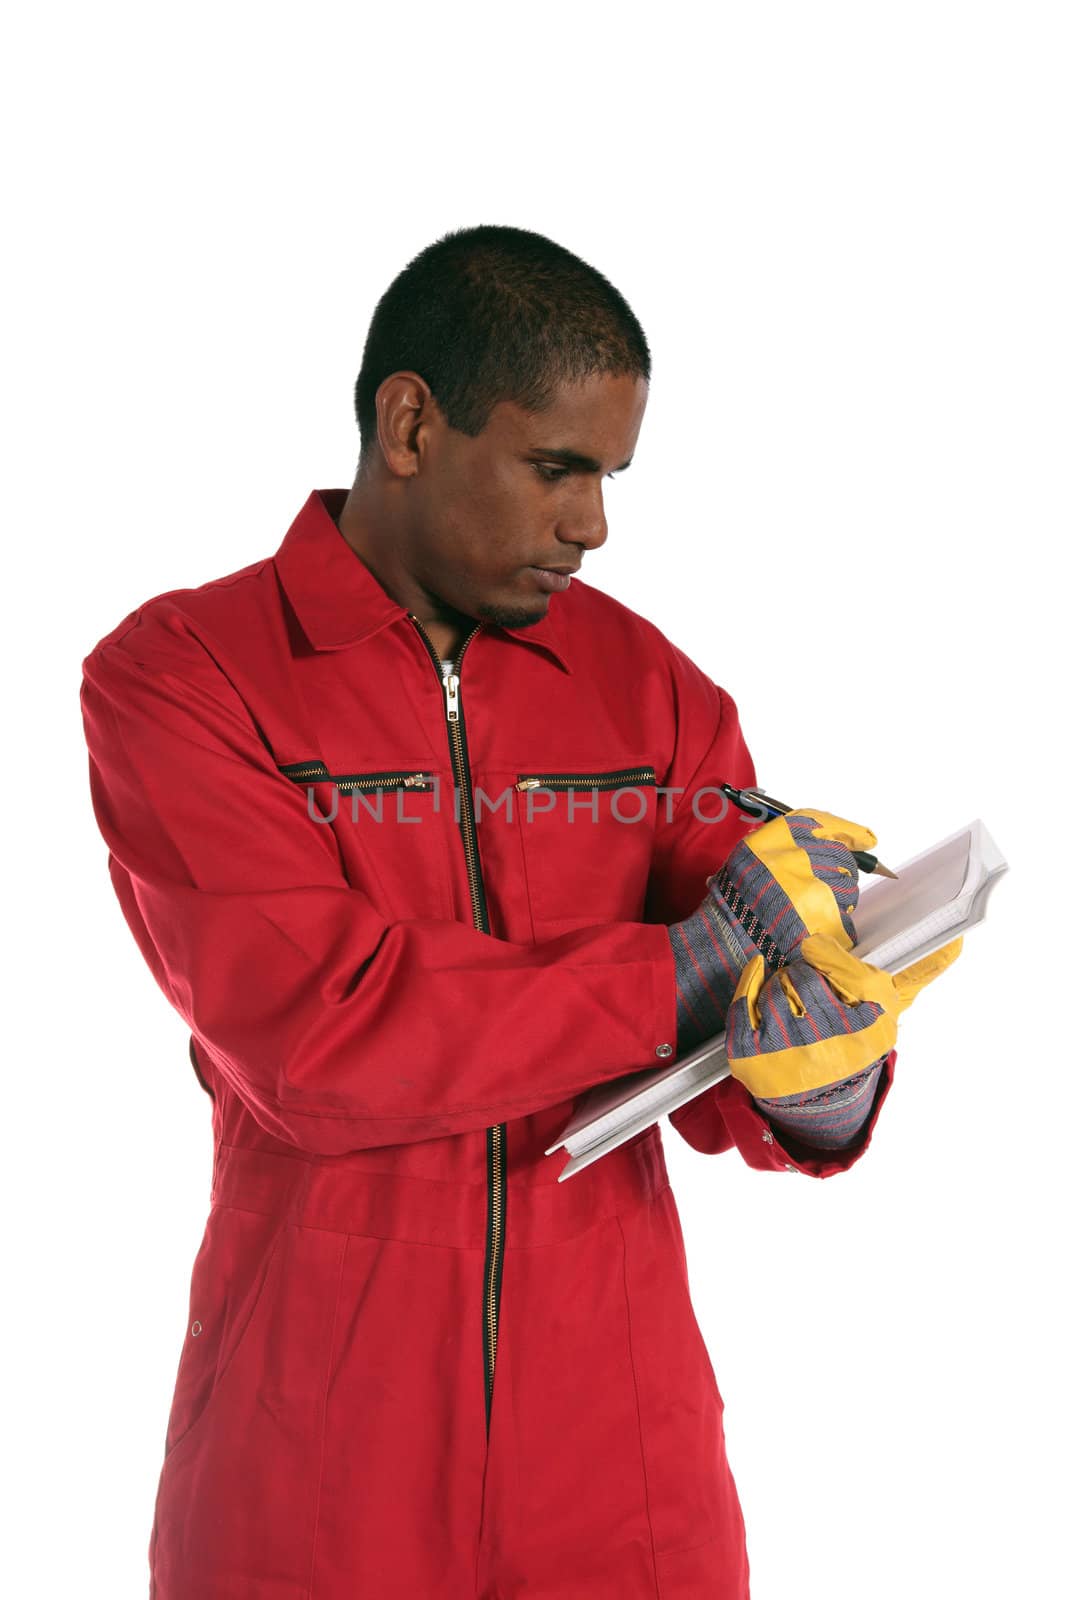 An ambitious dark-skinned worker during stocktaking. All on white background.